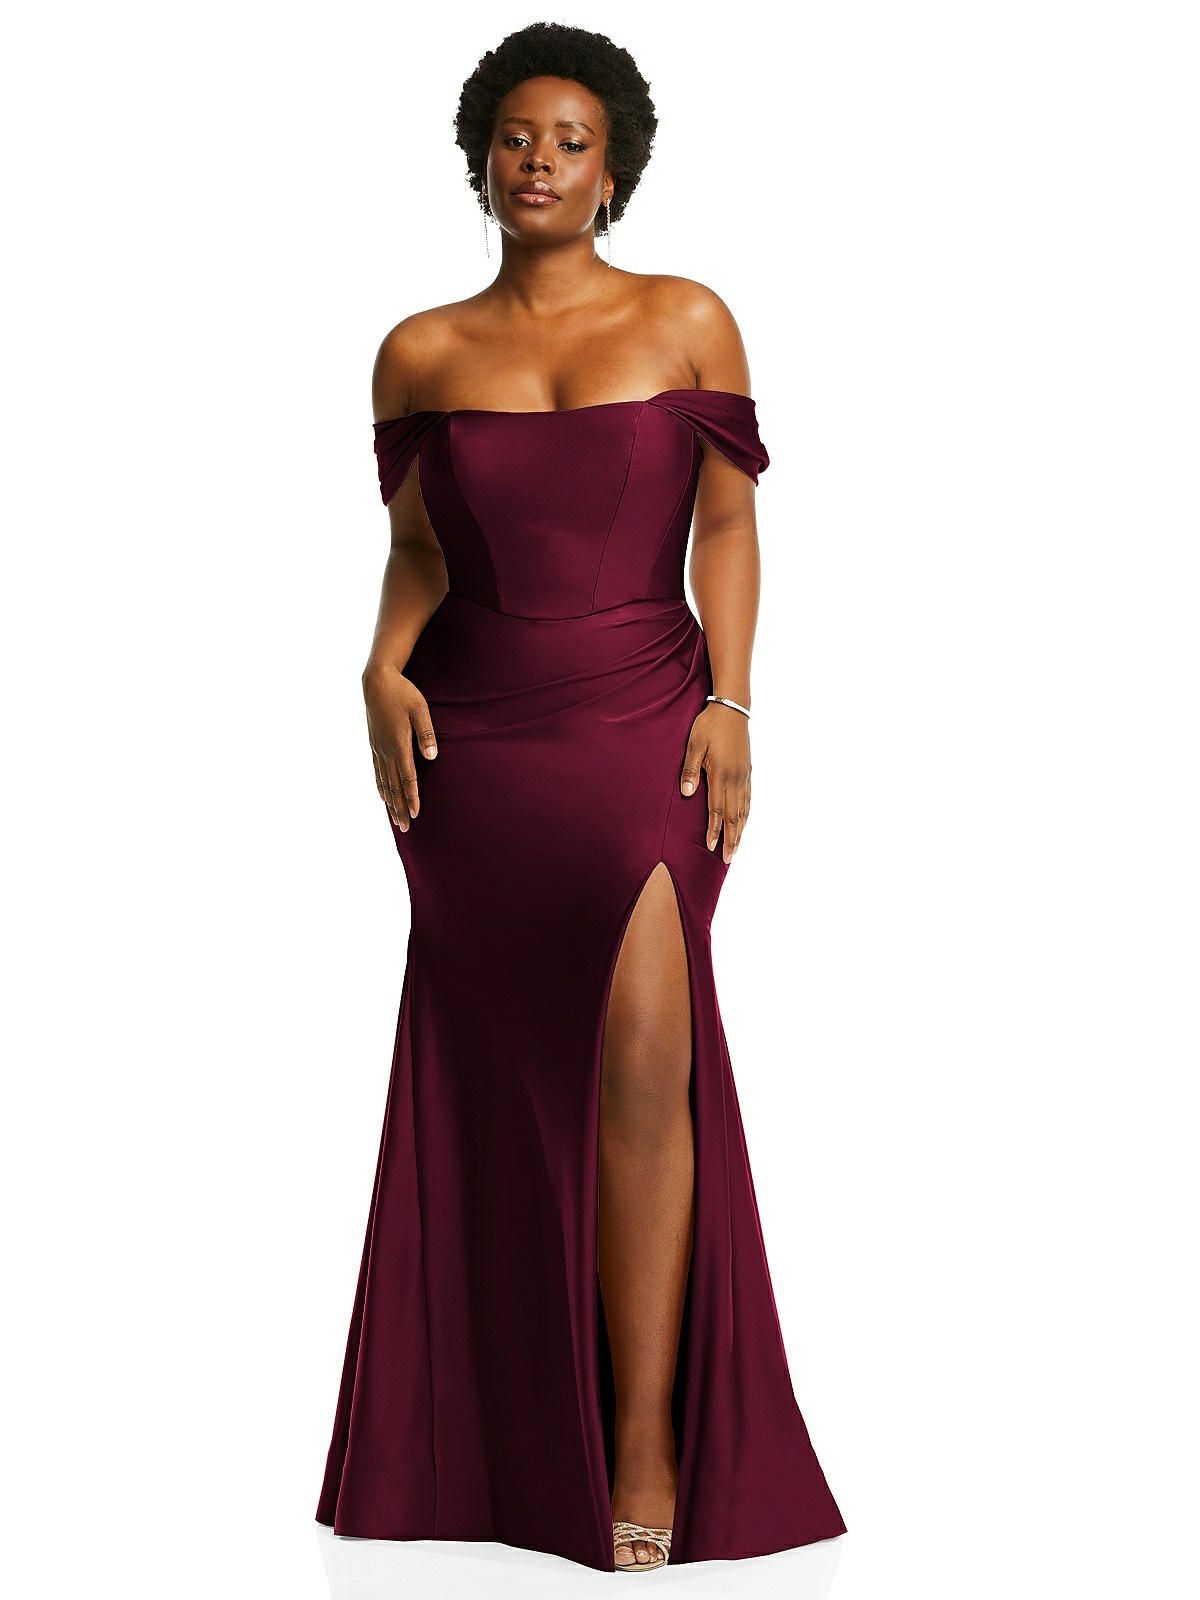 Off-the-Shoulder Corset Stretch Satin Mermaid Dress with Slight Train | The Dessy Group